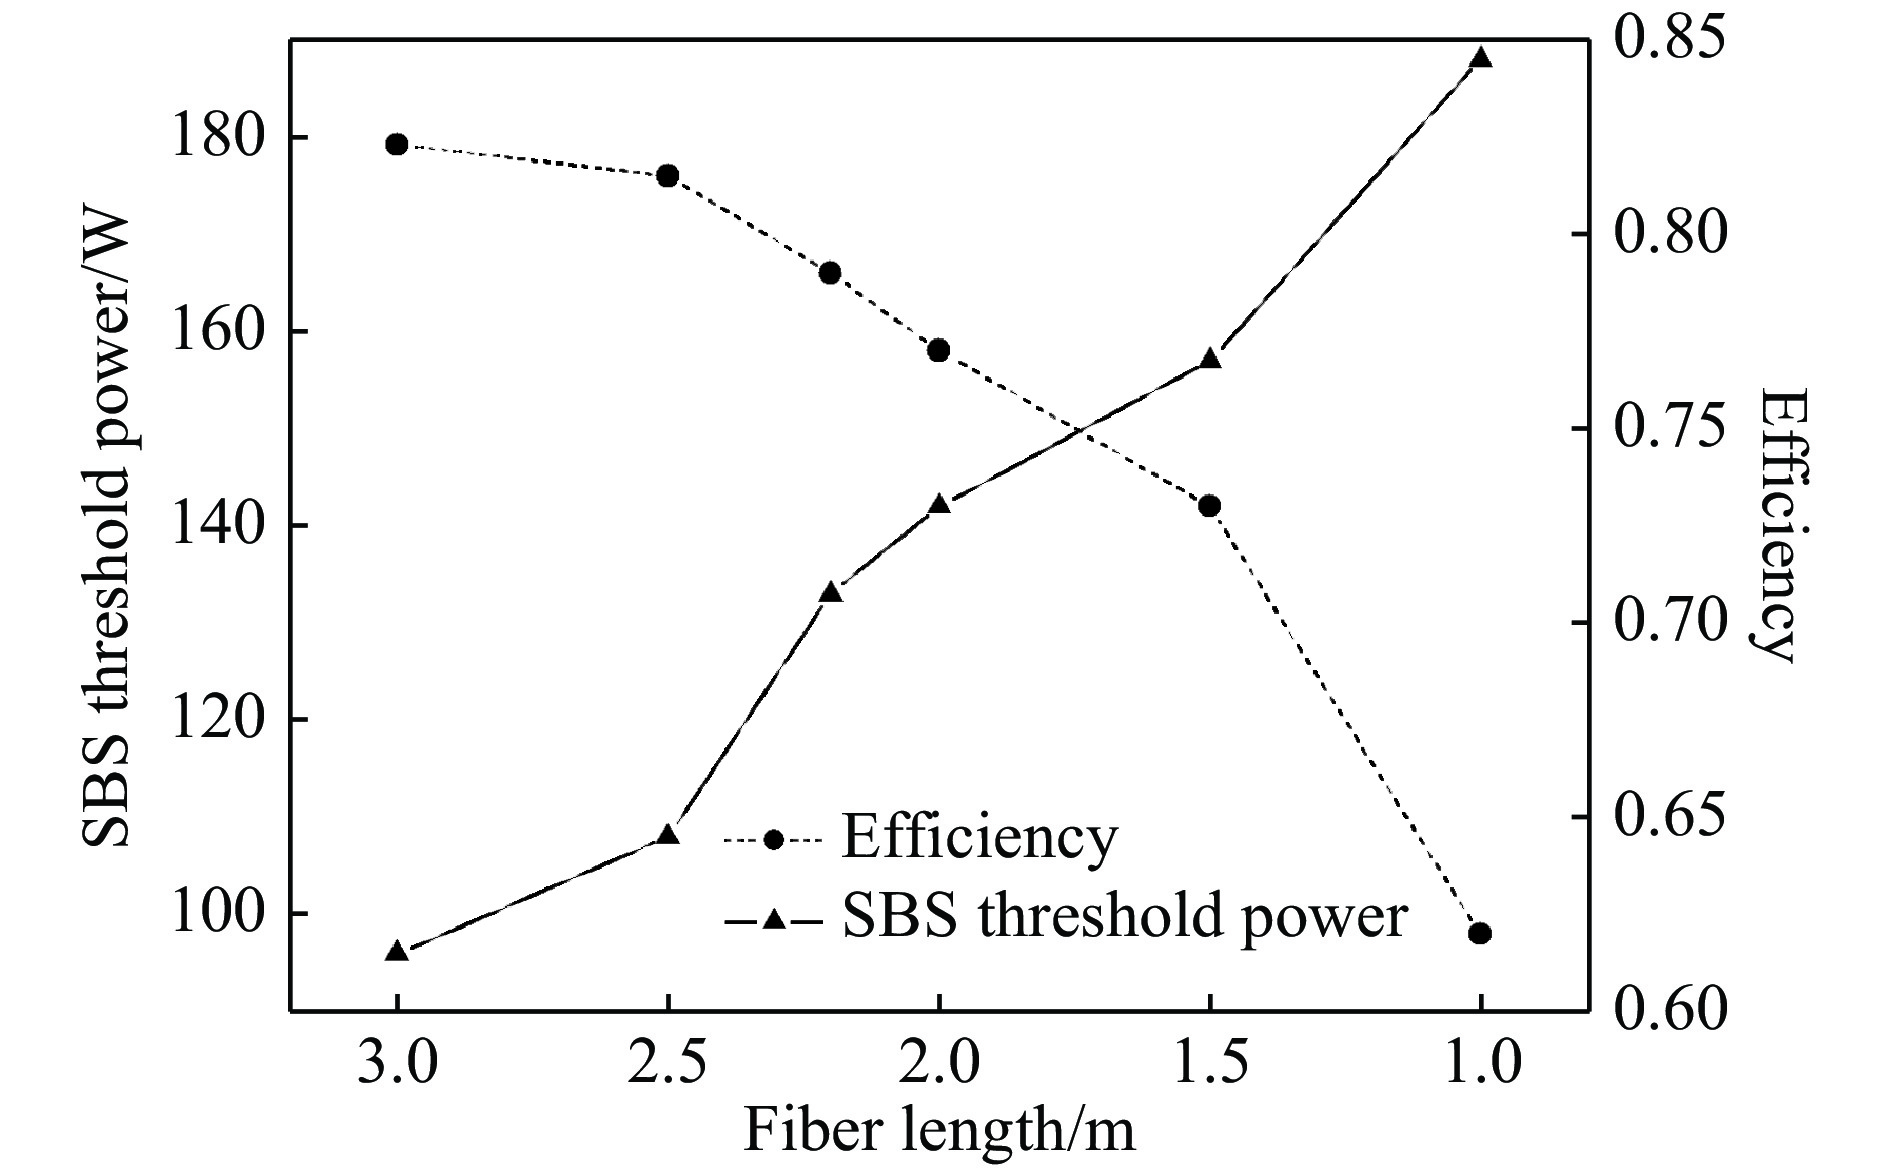 Efficiency and SBS threshold power as a function of fiber length